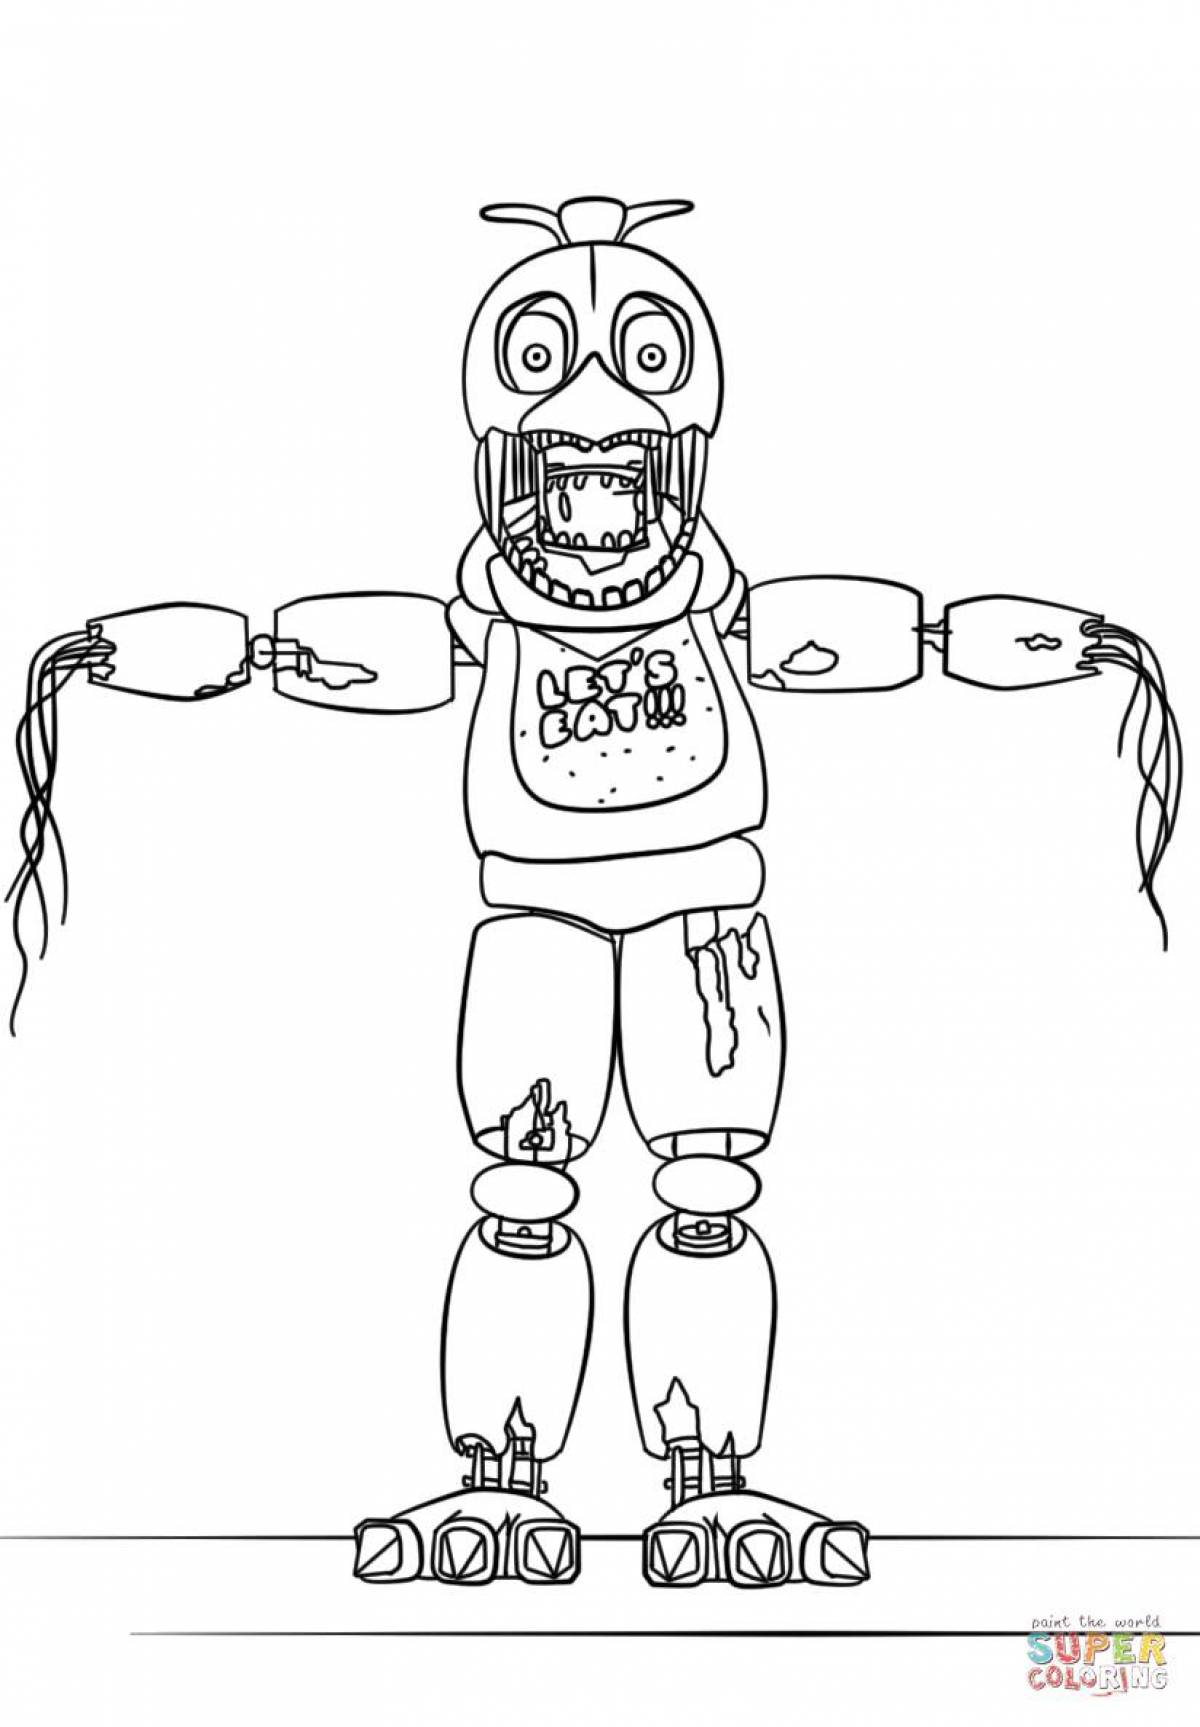 Quirky chica coloring book